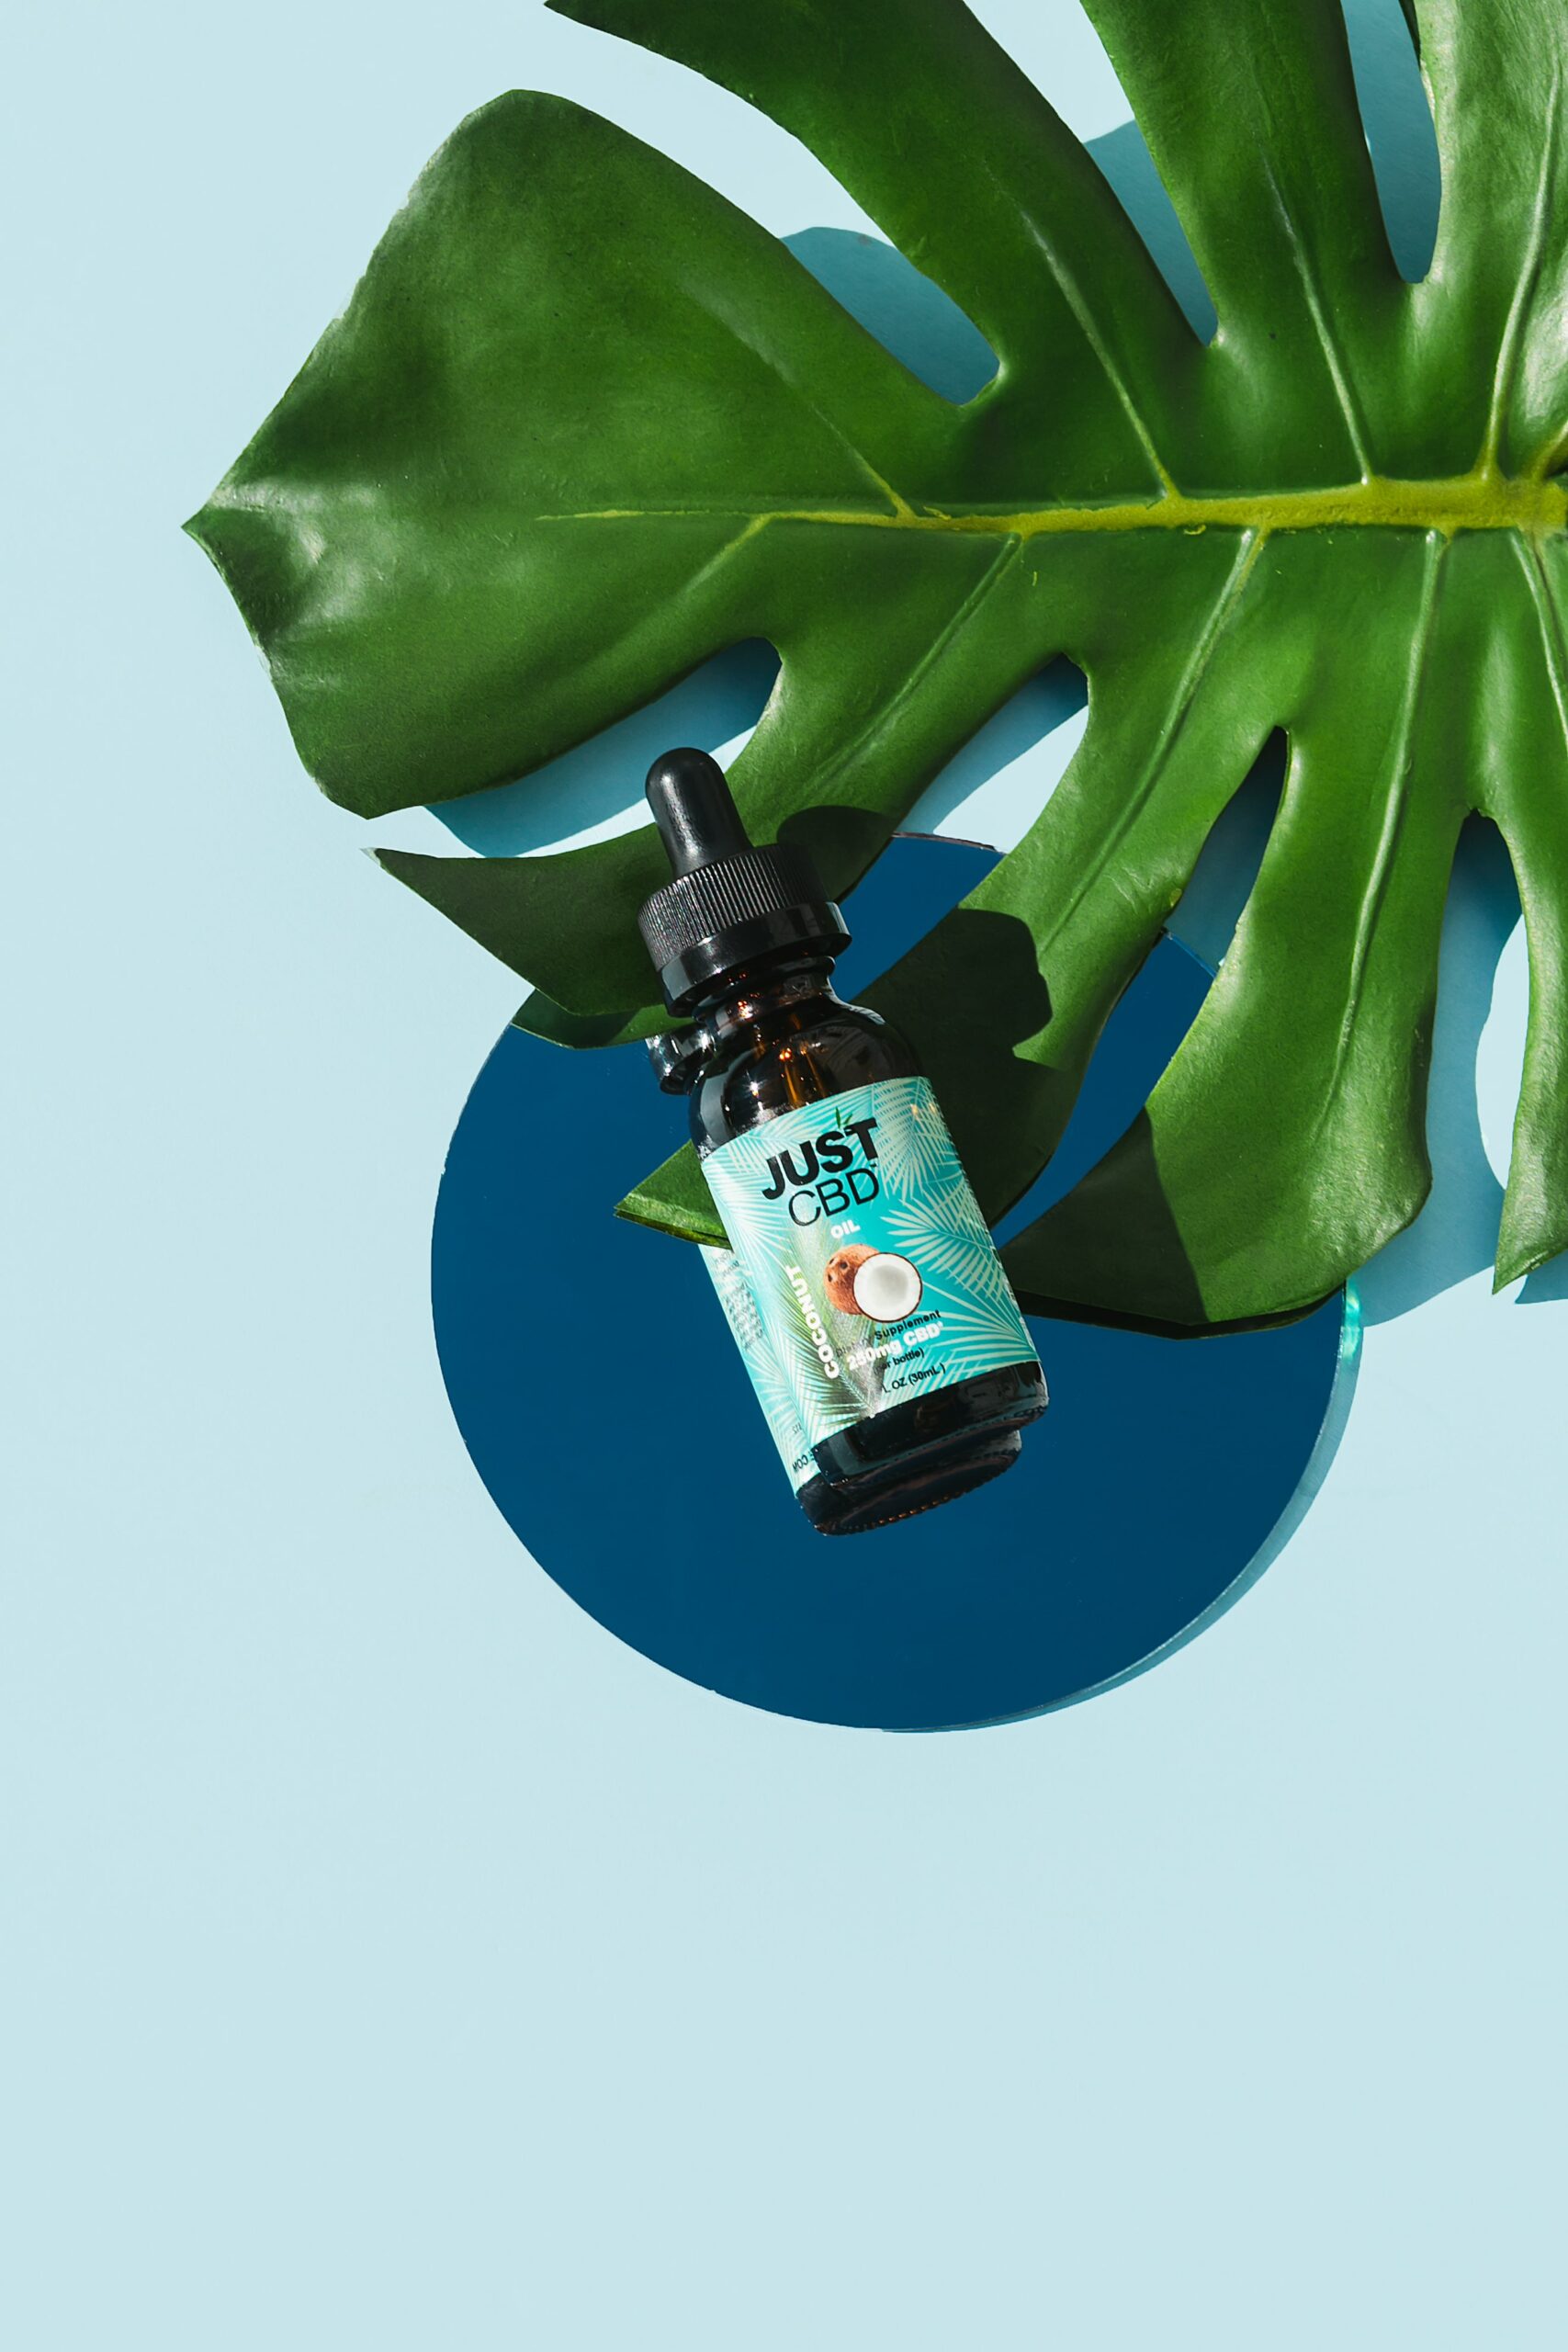 WHAT YOU NEED TO KNOW ABOUT BROAD-SPECTRUM CBD OIL